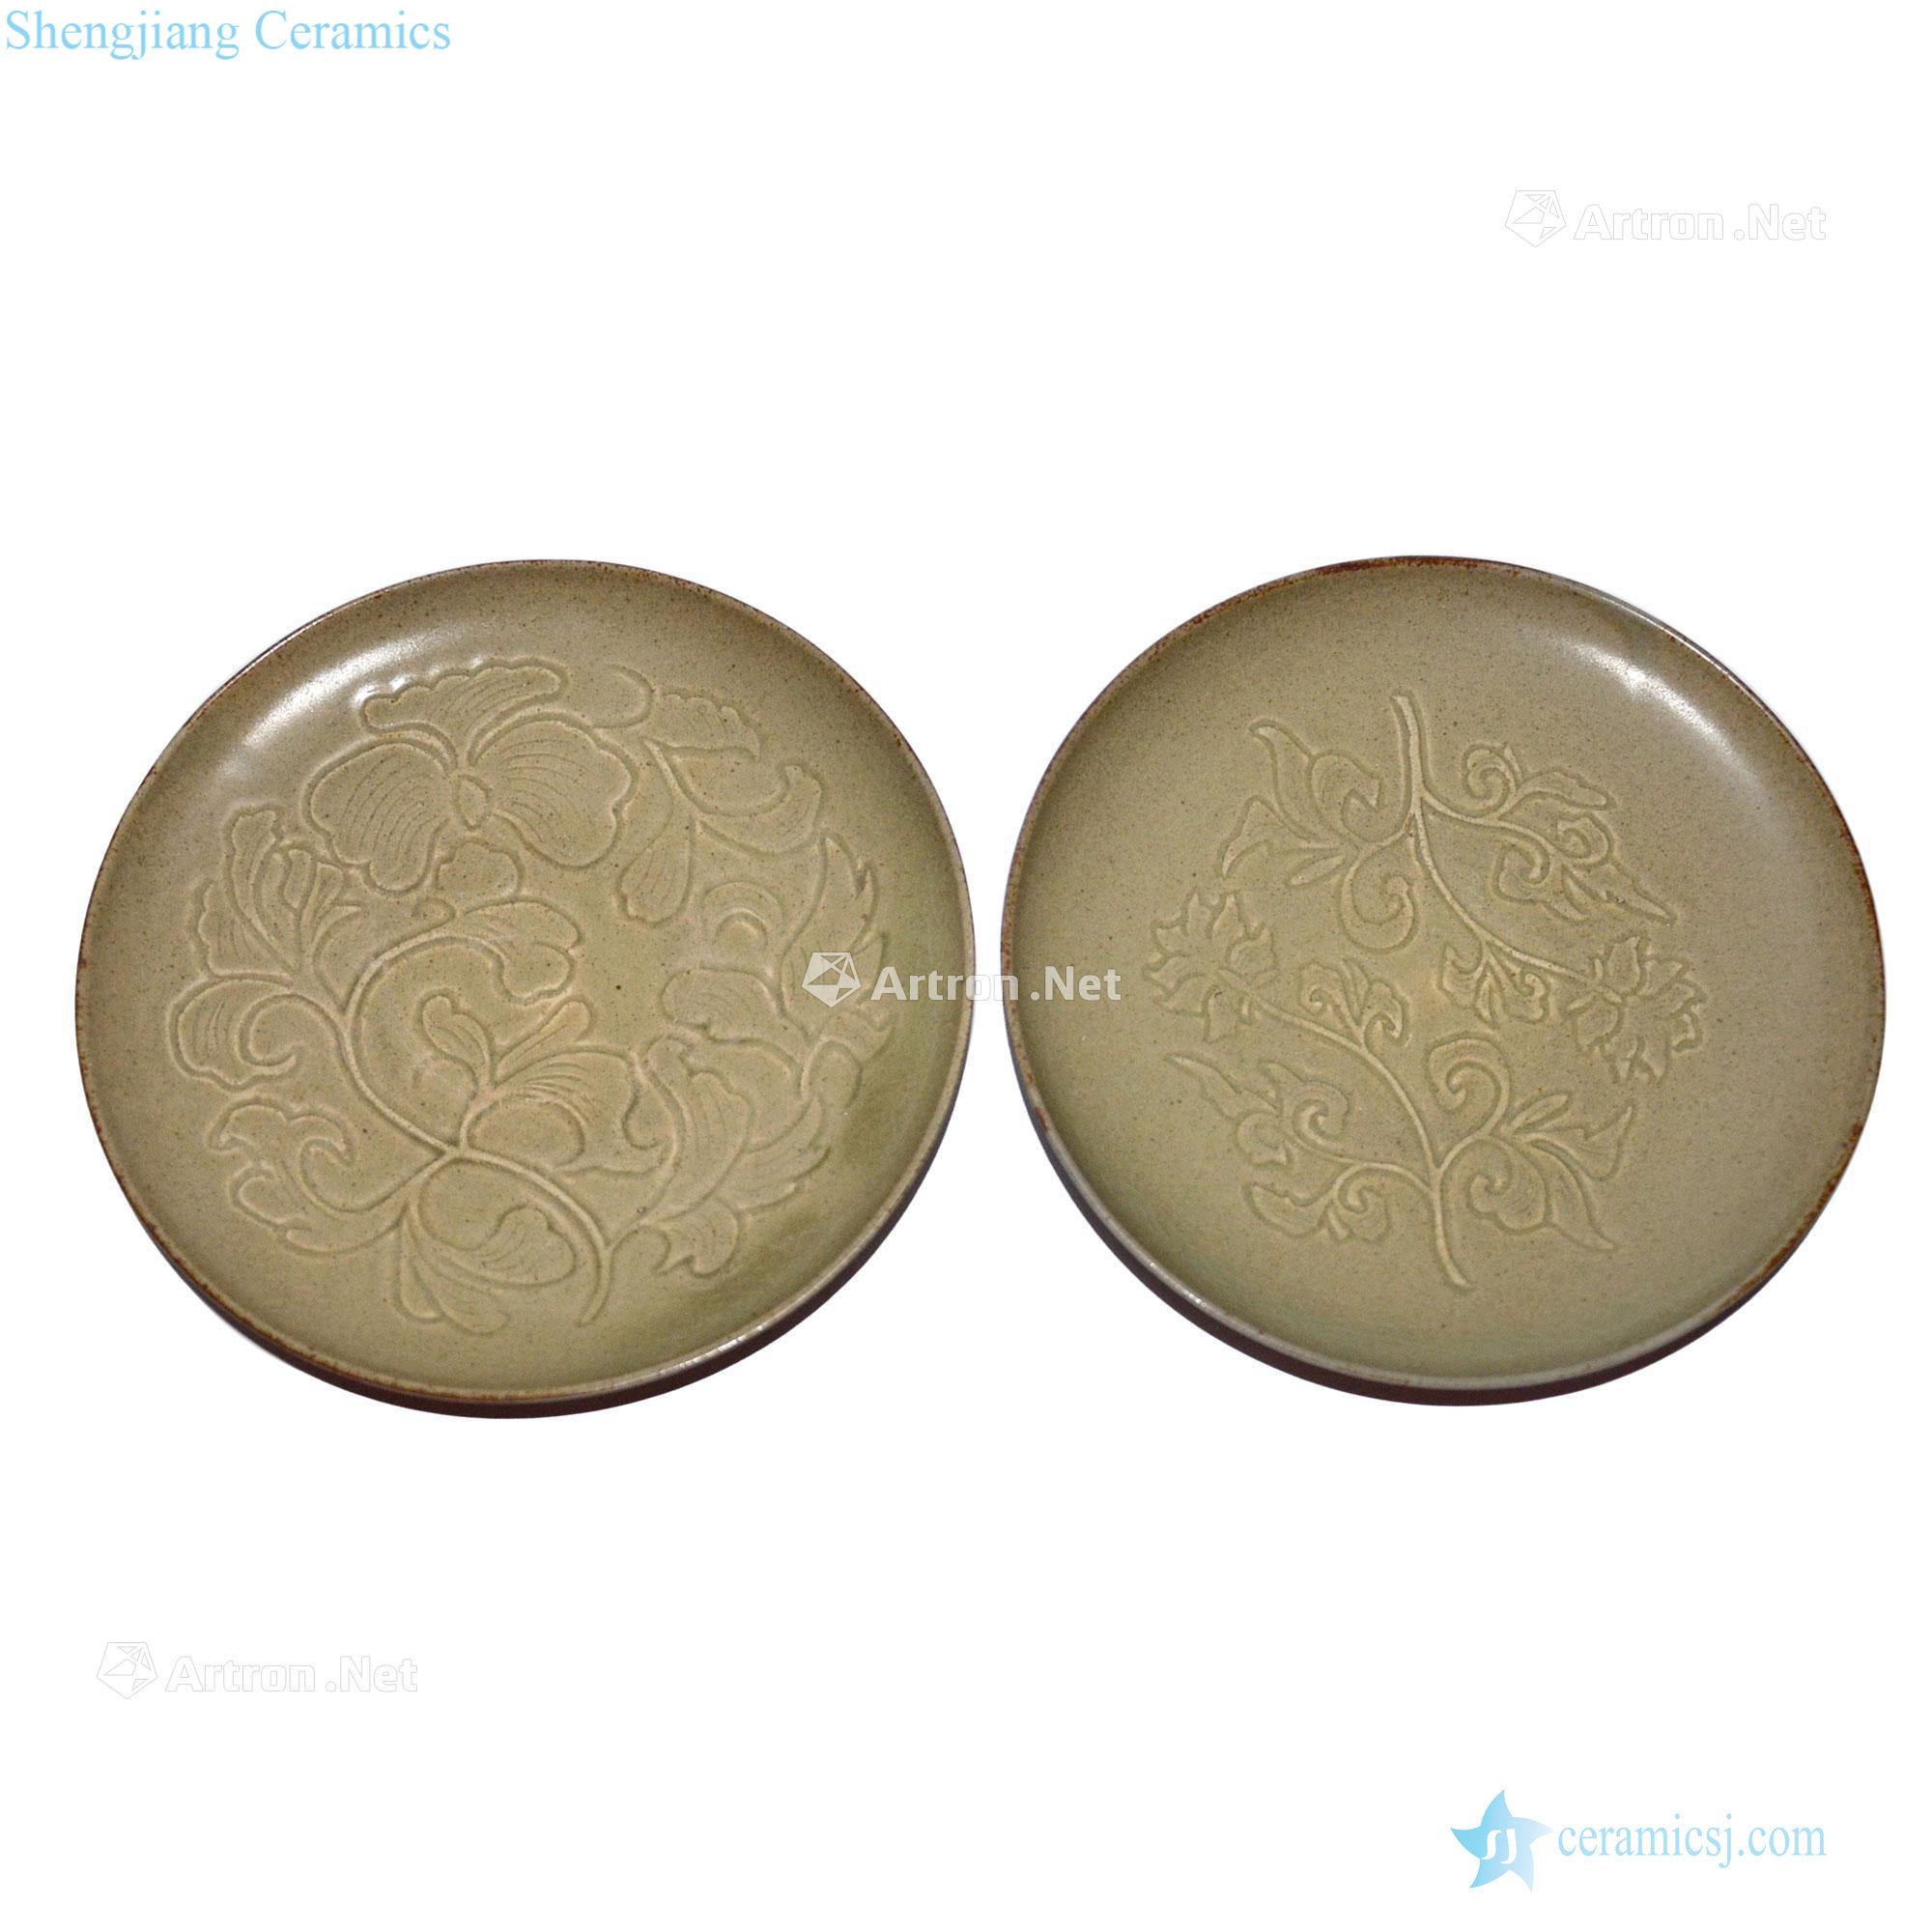 The song dynasty Yao state kiln green glaze cut flower plate (a)